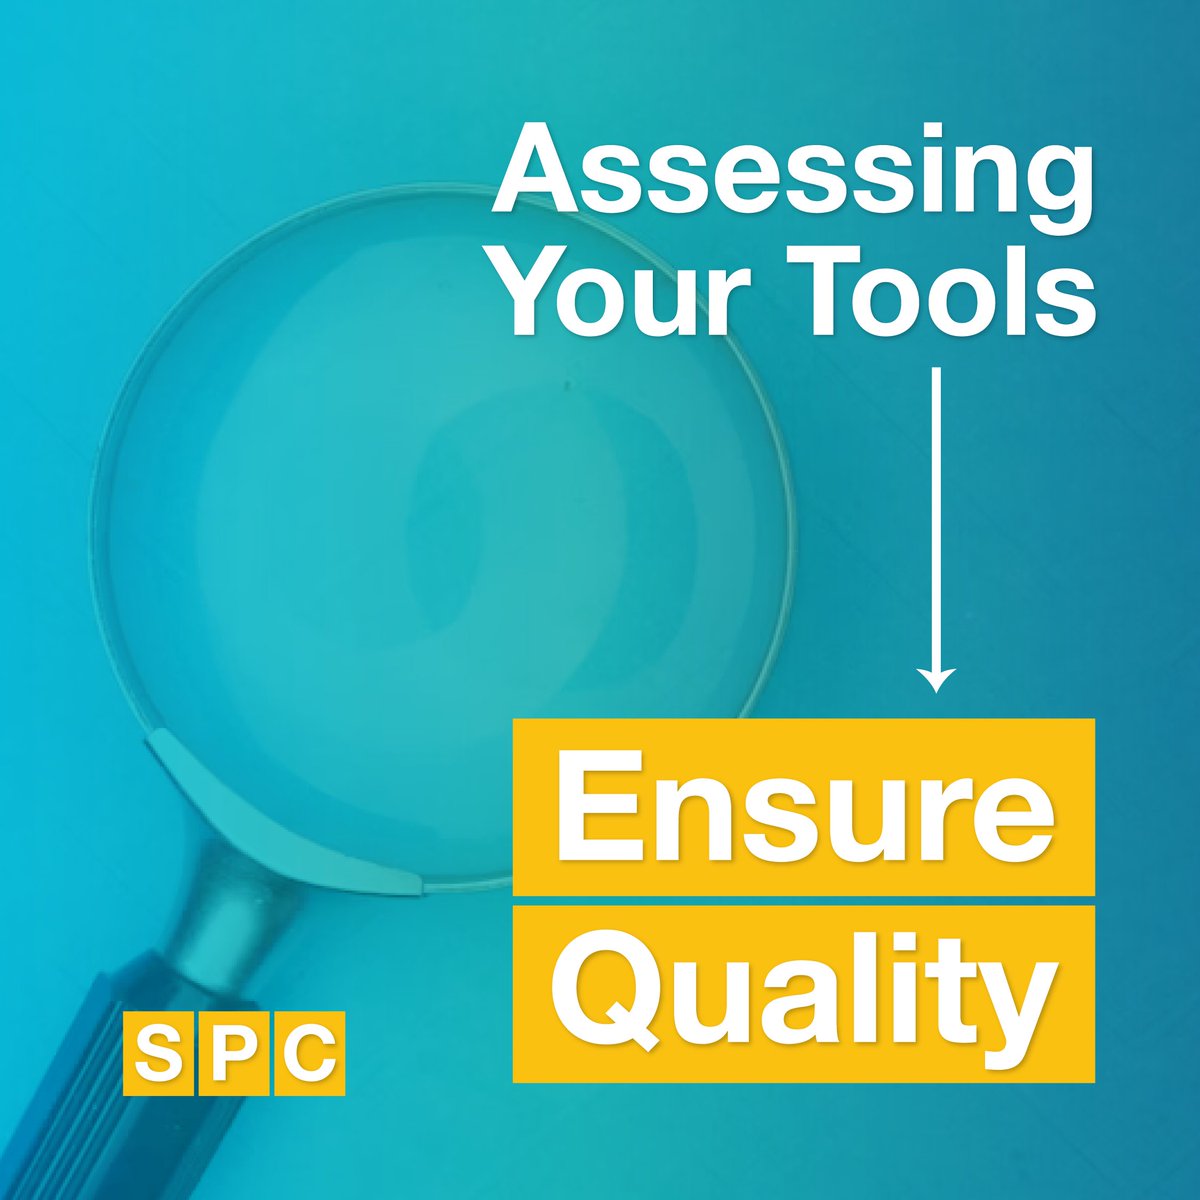 If you pride yourself on quality, you need to assess your tools. If you’re using archaic Excel line and bar charts, you’re not exemplifying quality. Try a free trial of Smart Performance Charts: qimacros.com/trial/30-day
#qualityimprovement #QI #healthcare #quality